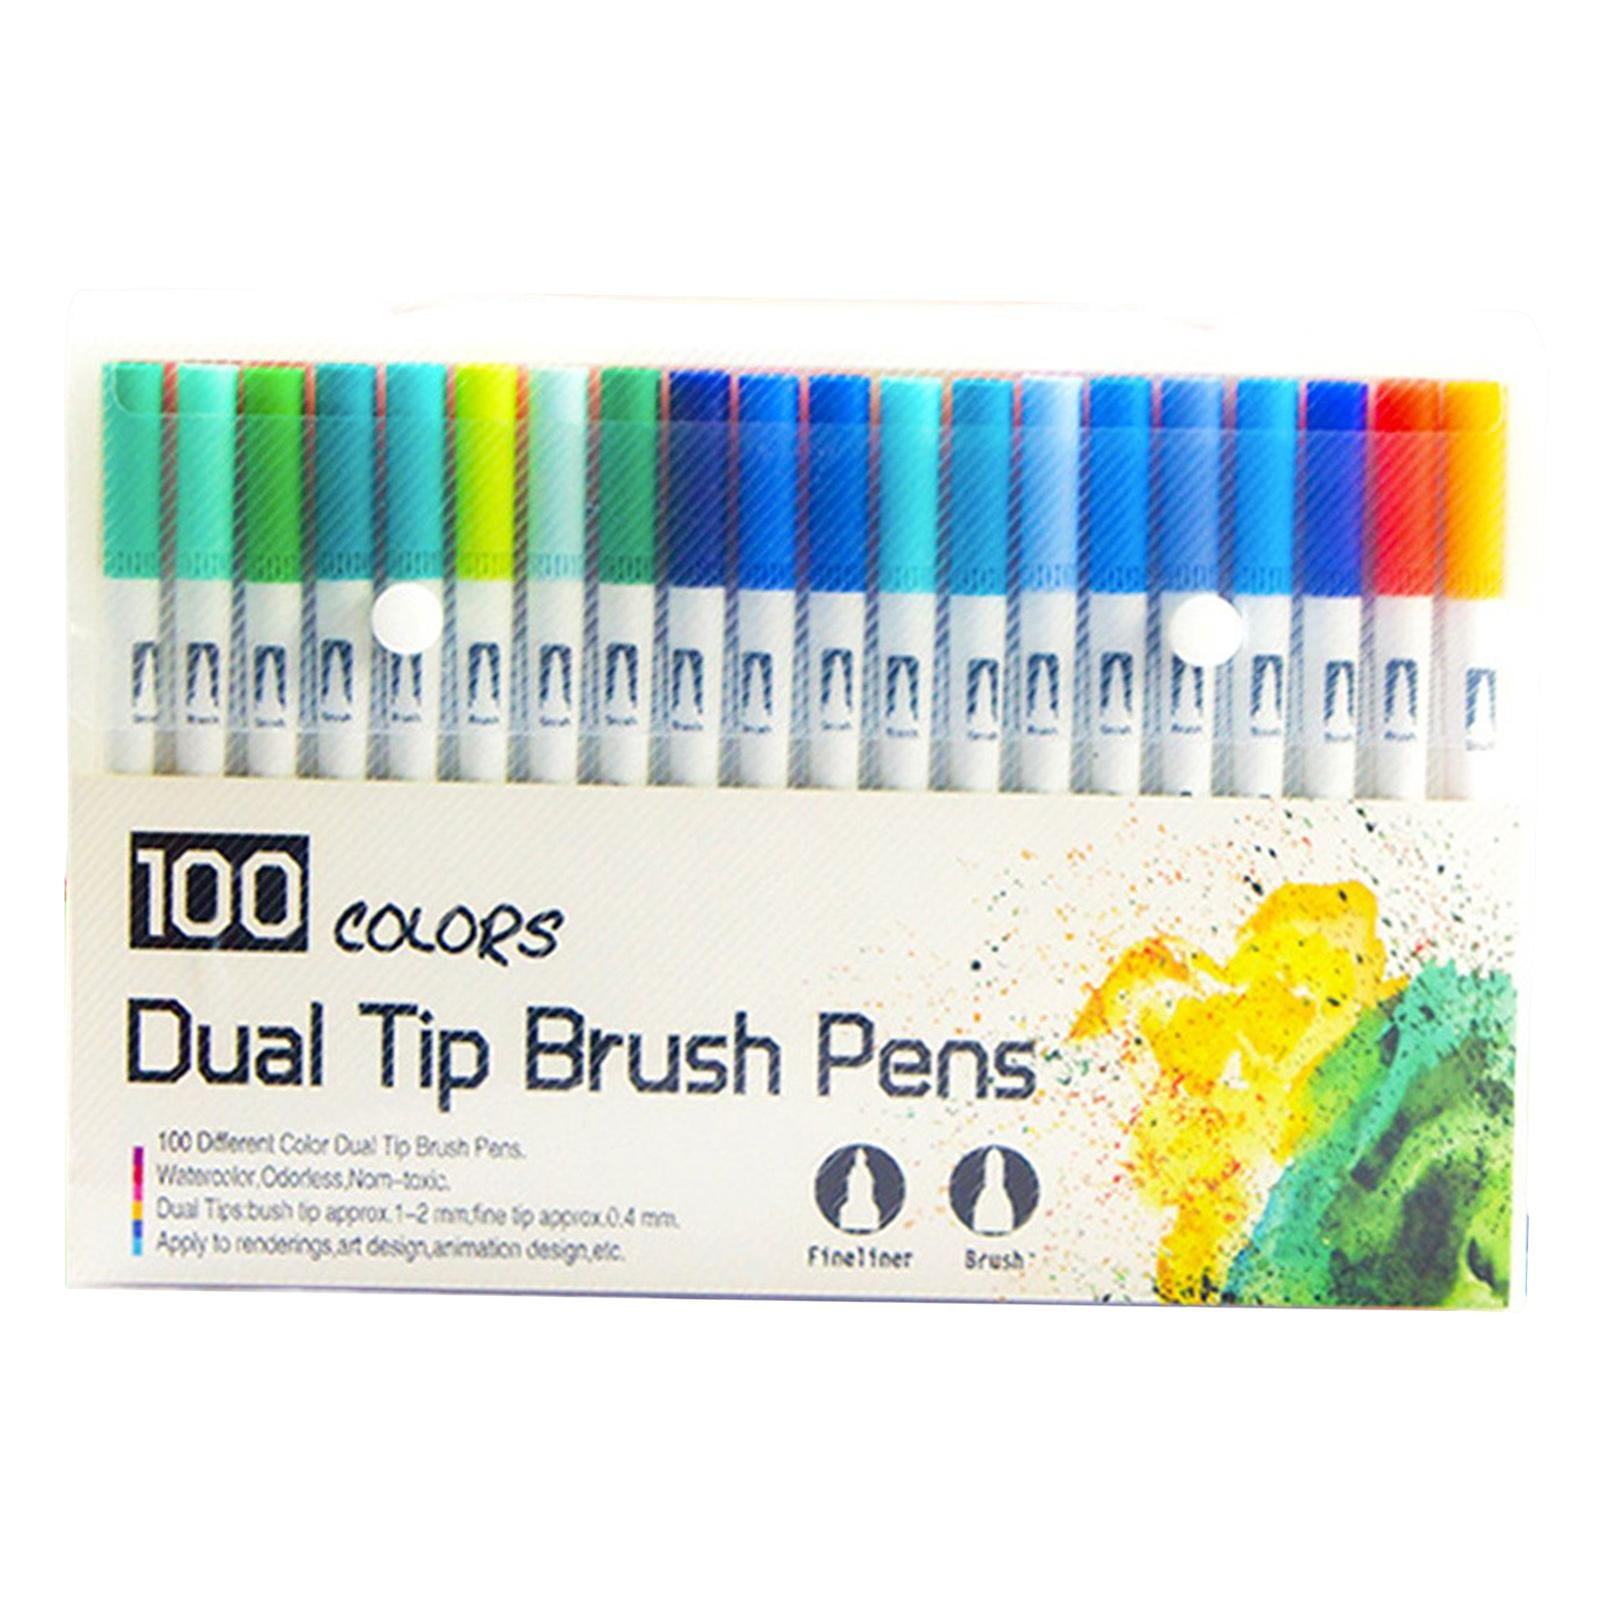 Mancola Dual Brush Pens Art Markers, 100 Colors Fine Point Markers